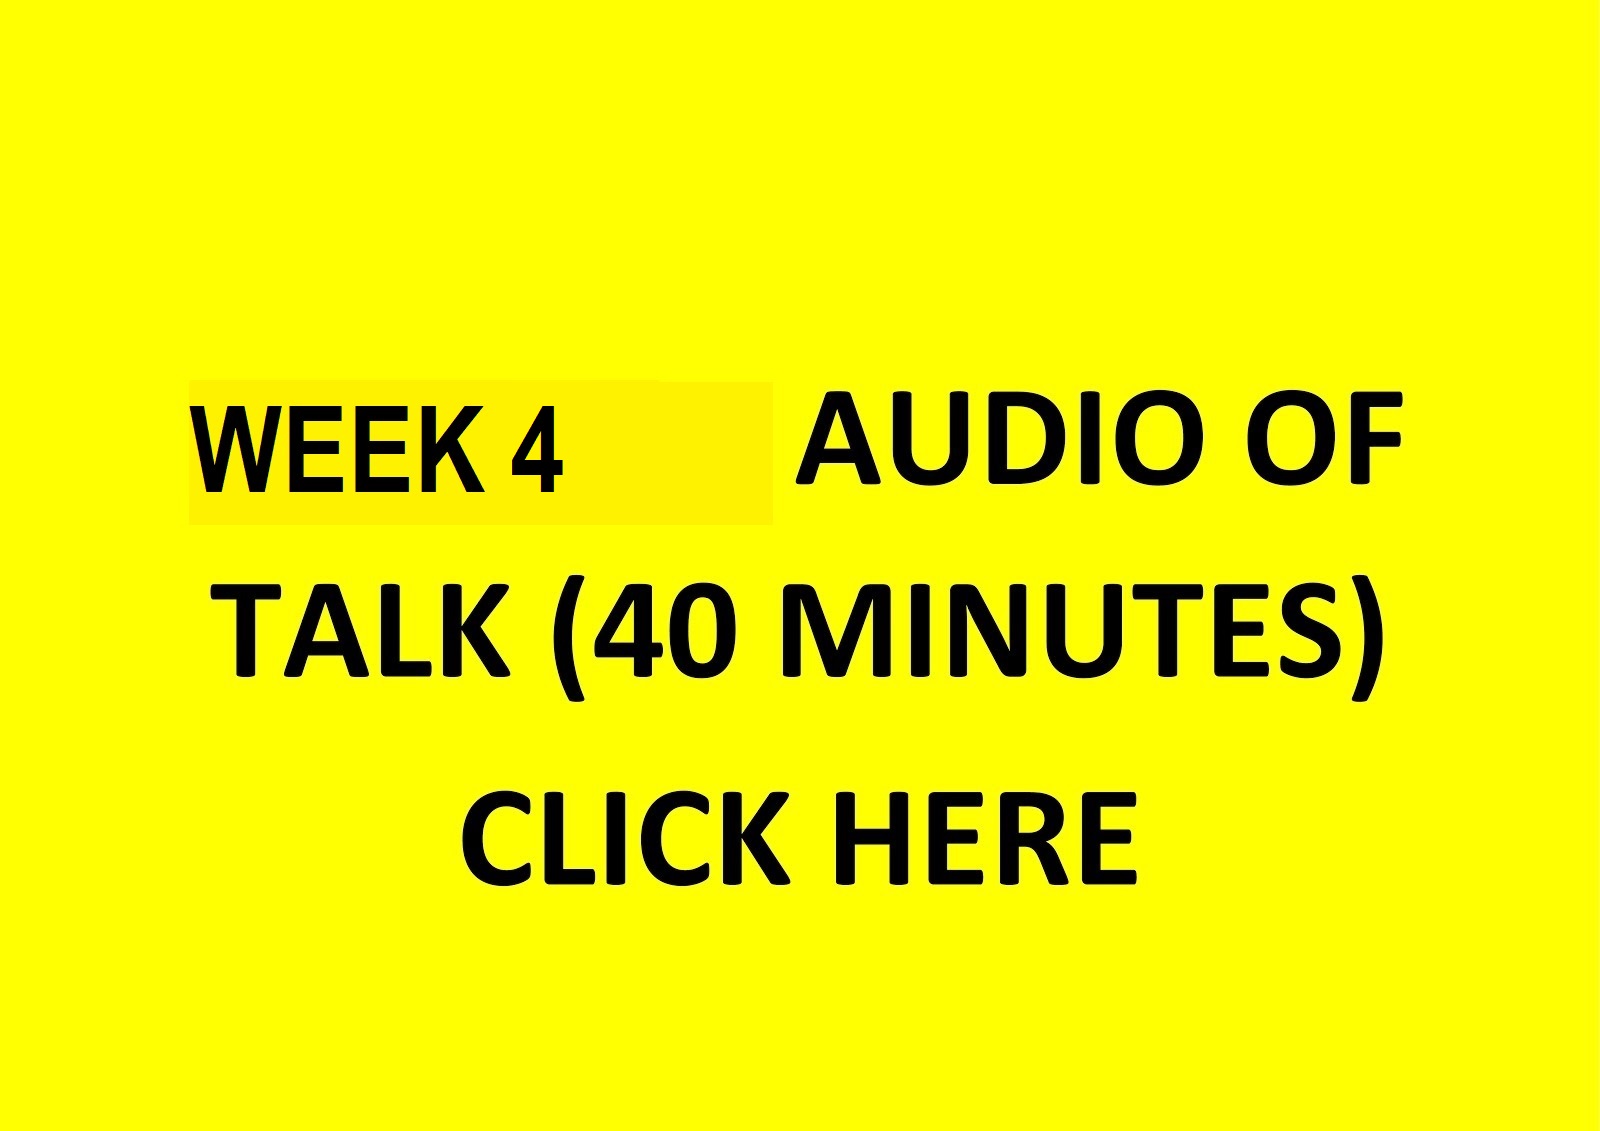 Week 4 Audio - click on picture to hear